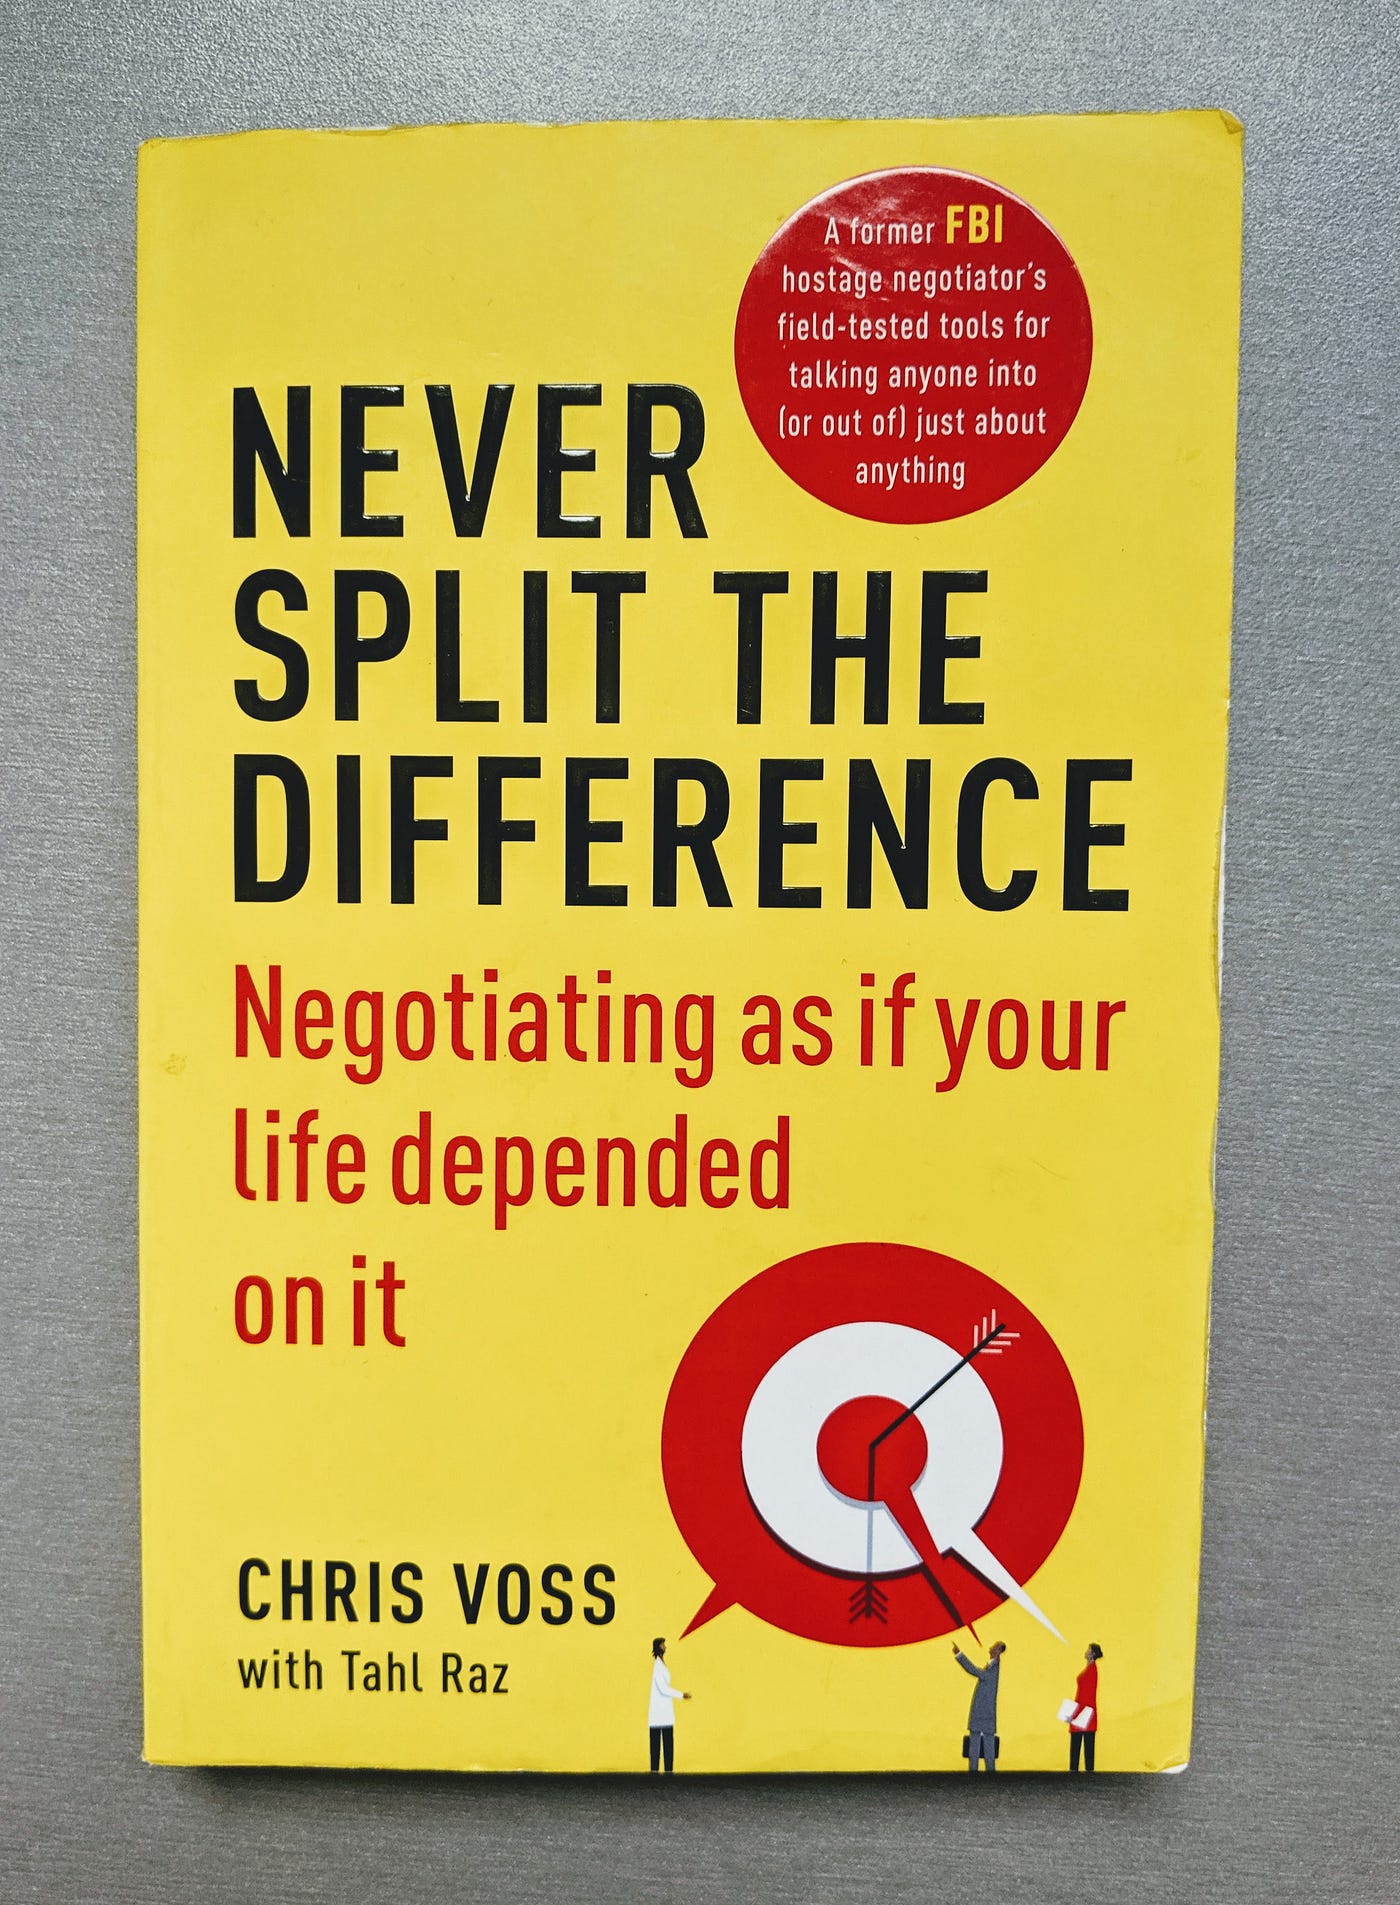 Chris Voss, Former FBI Lead Negotiator and Author of Never Split The  Difference On The Most